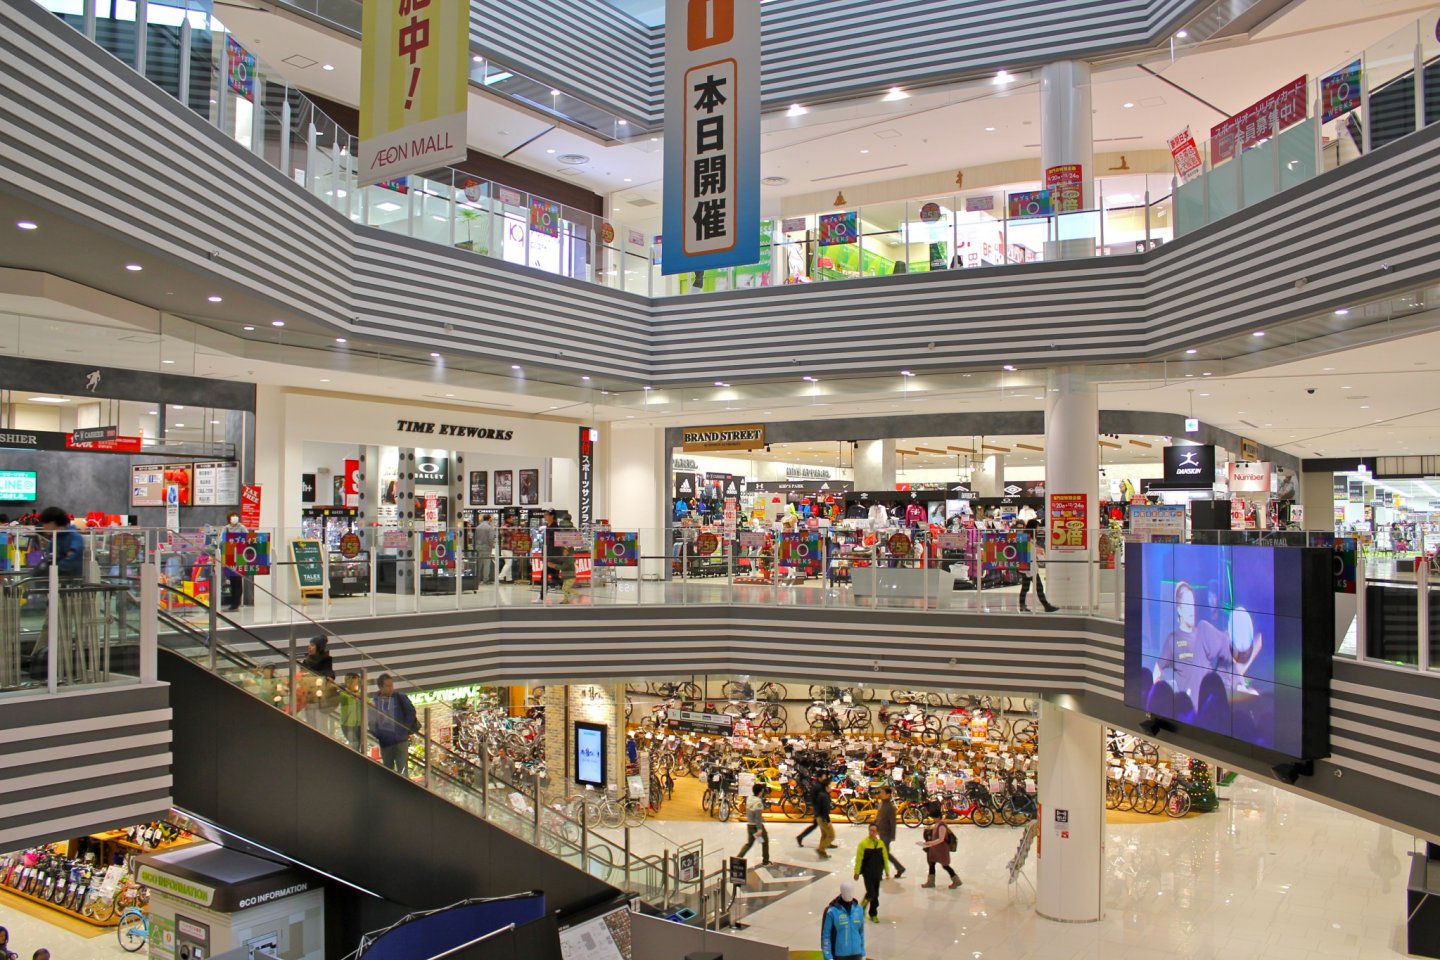 Active Mall is one of four "Lifestyle" malls that comprise AEON Mall at Makuhari New City in Chiba